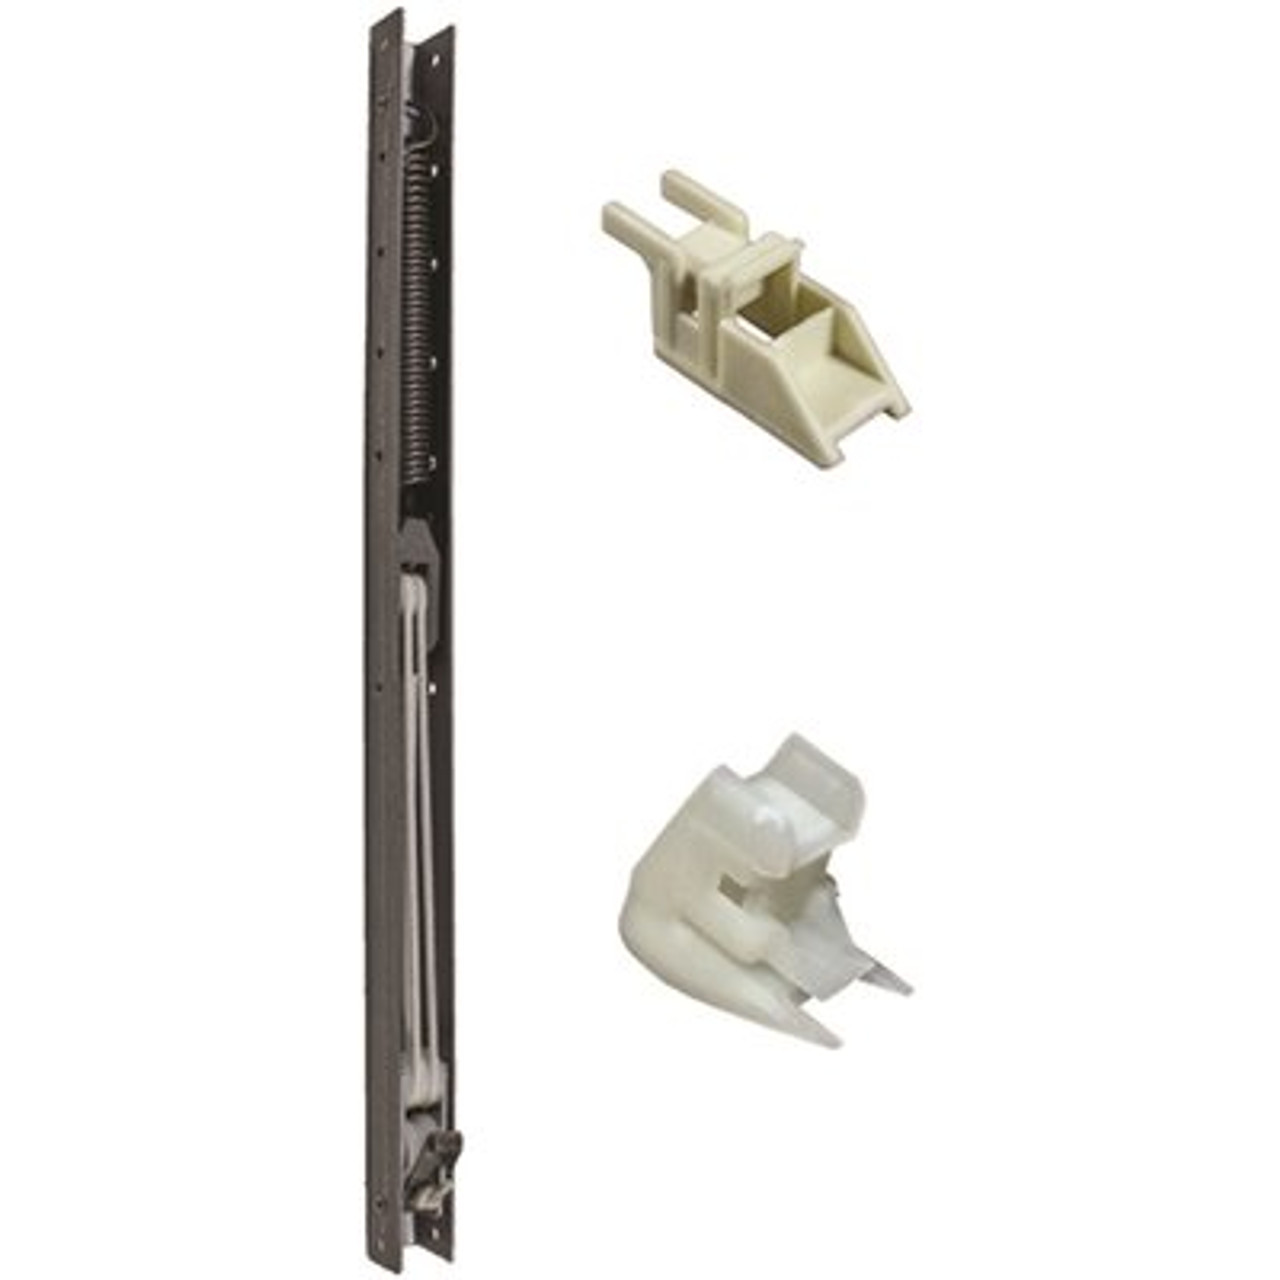 23 in. L Window Channel Balance 2230 with Top and Bottom End Brackets Attached 9/16 in. W x 5/8 in. D (Pack of 10) - 319751511